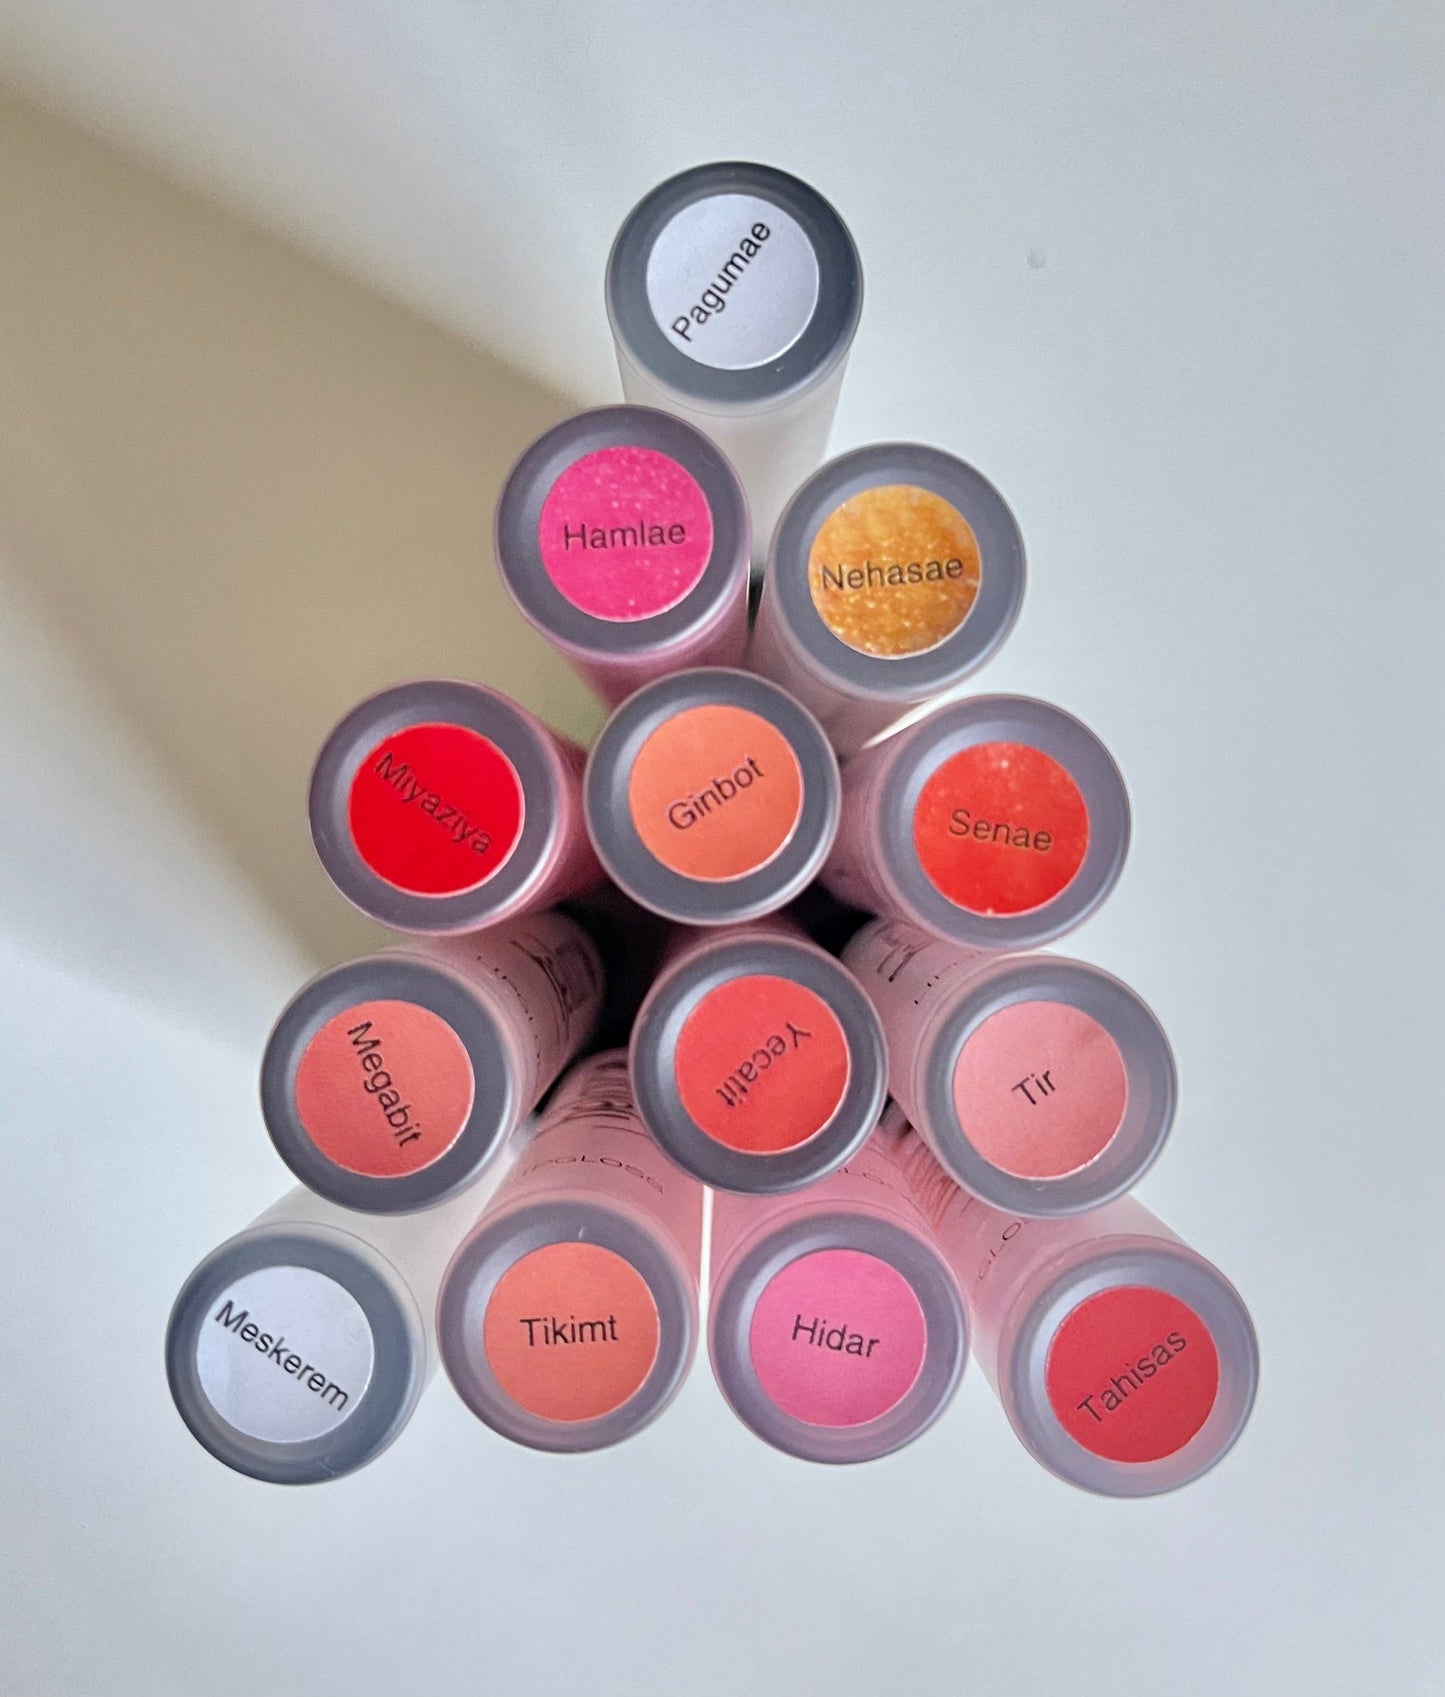 Ginbot Lip Gloss(Amharic for May)